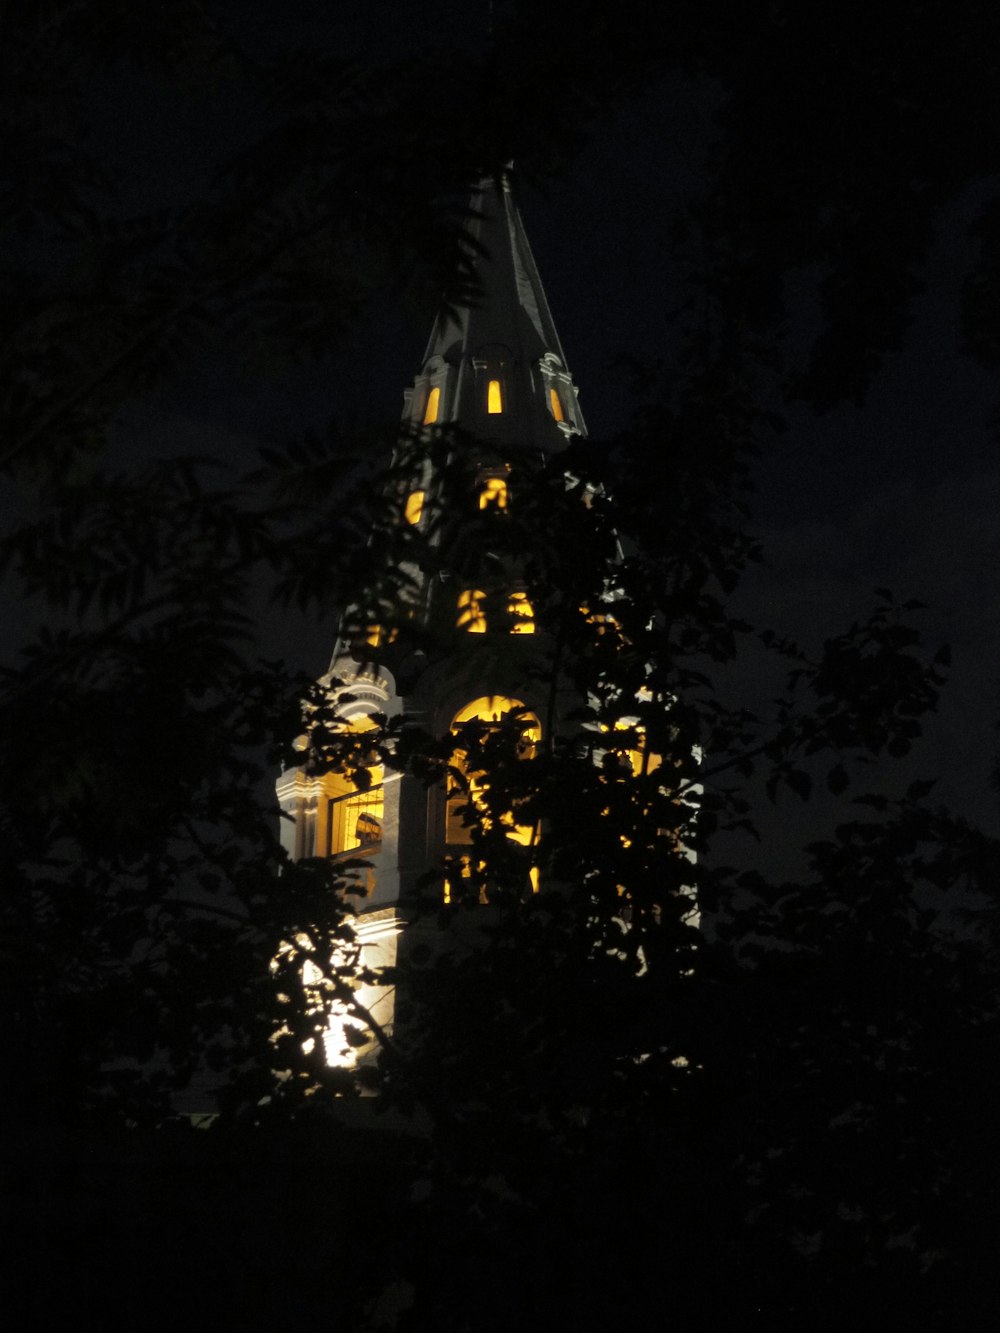 a clock tower lit up at night with trees in the foreground